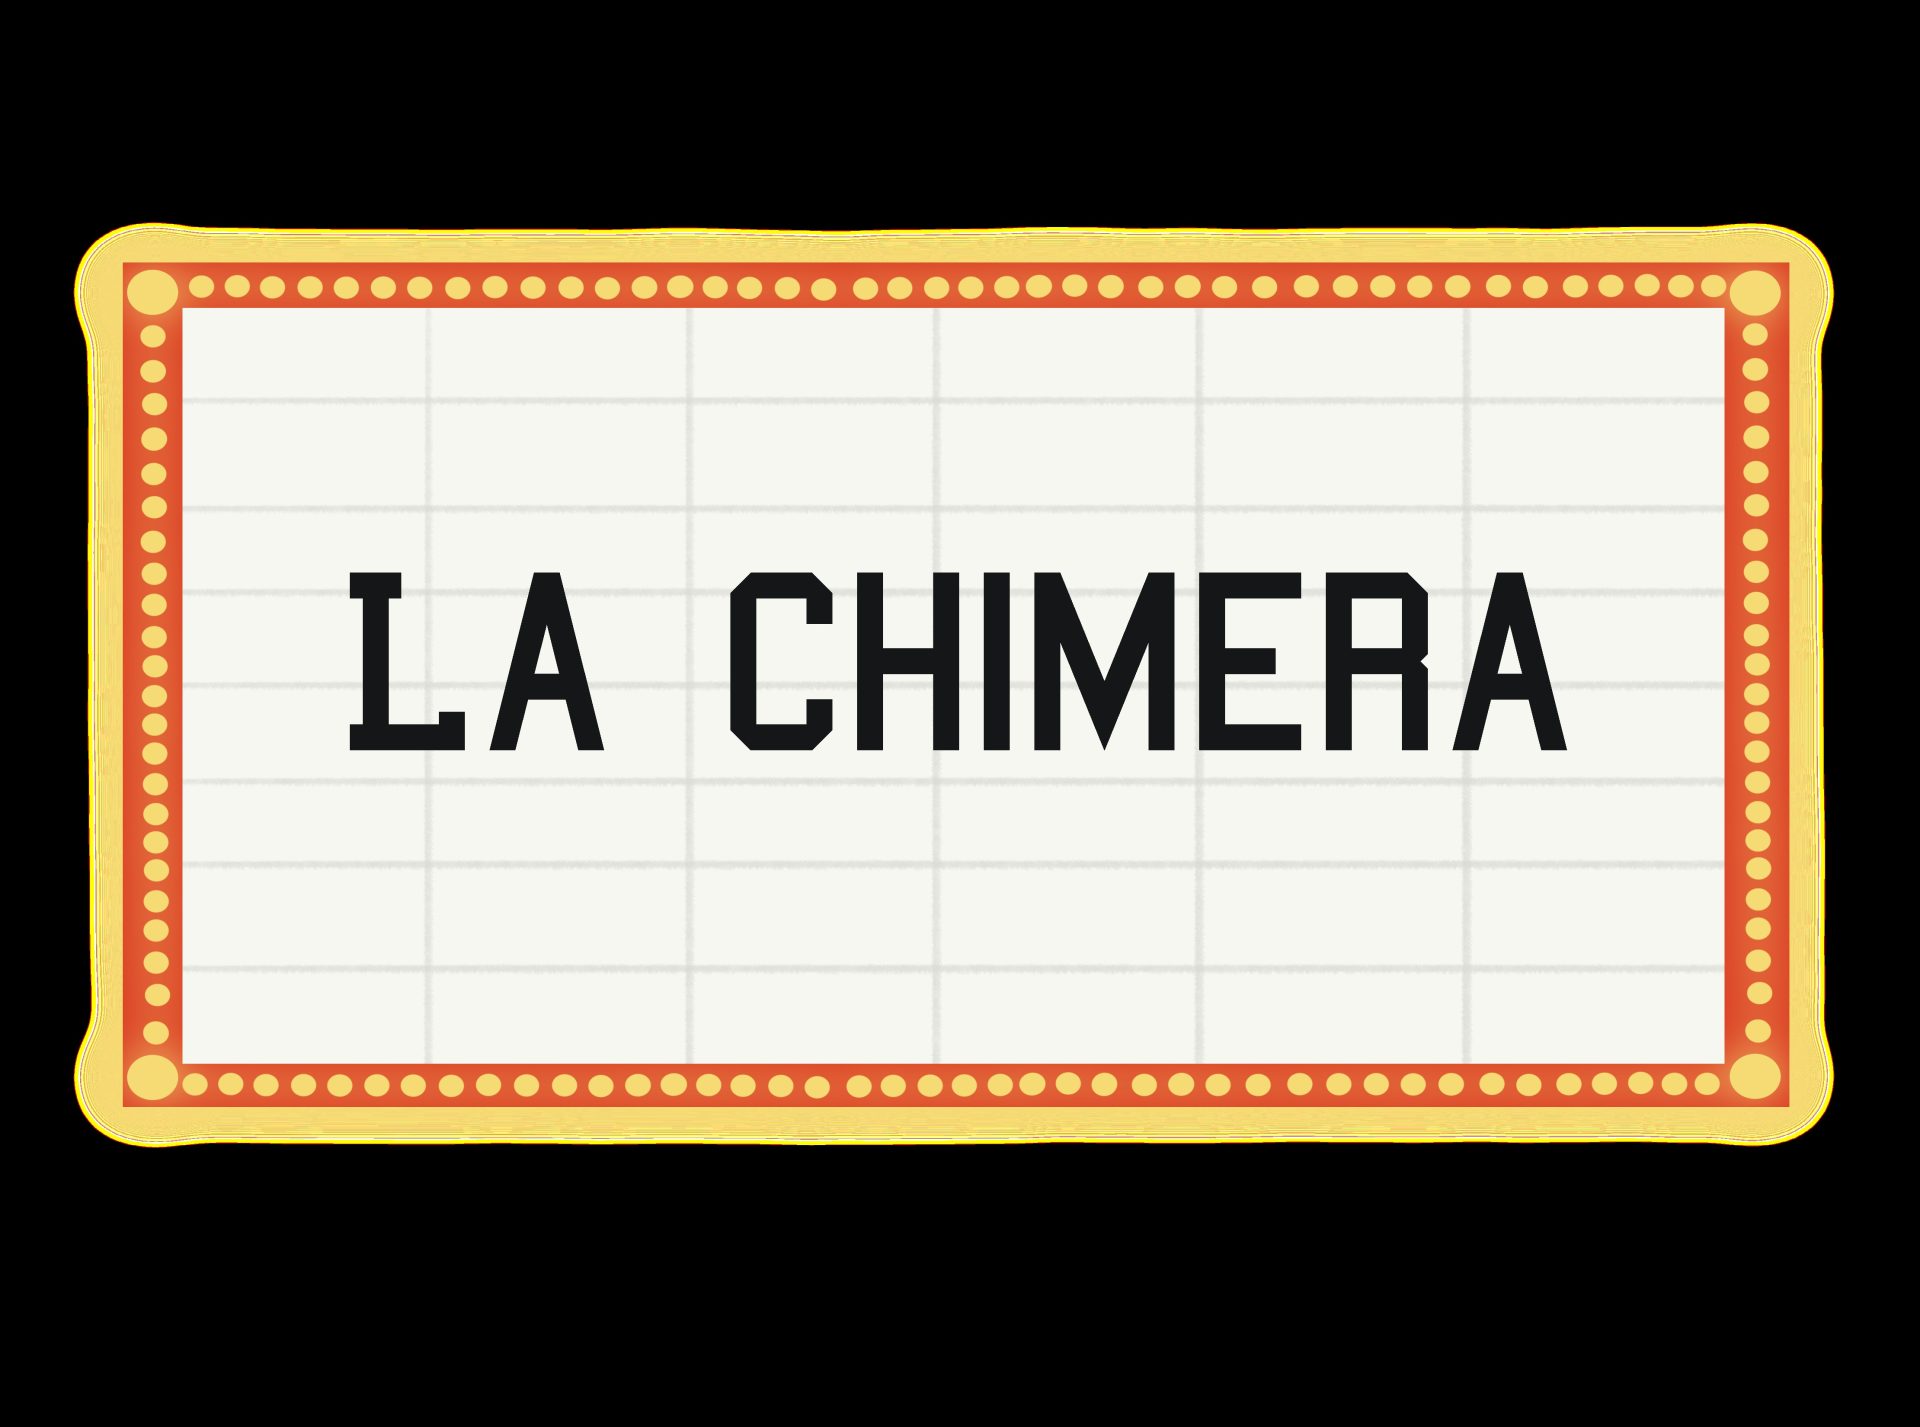 “La Chimera: Grave robbing plays as pastime to a dense reflection of lost love